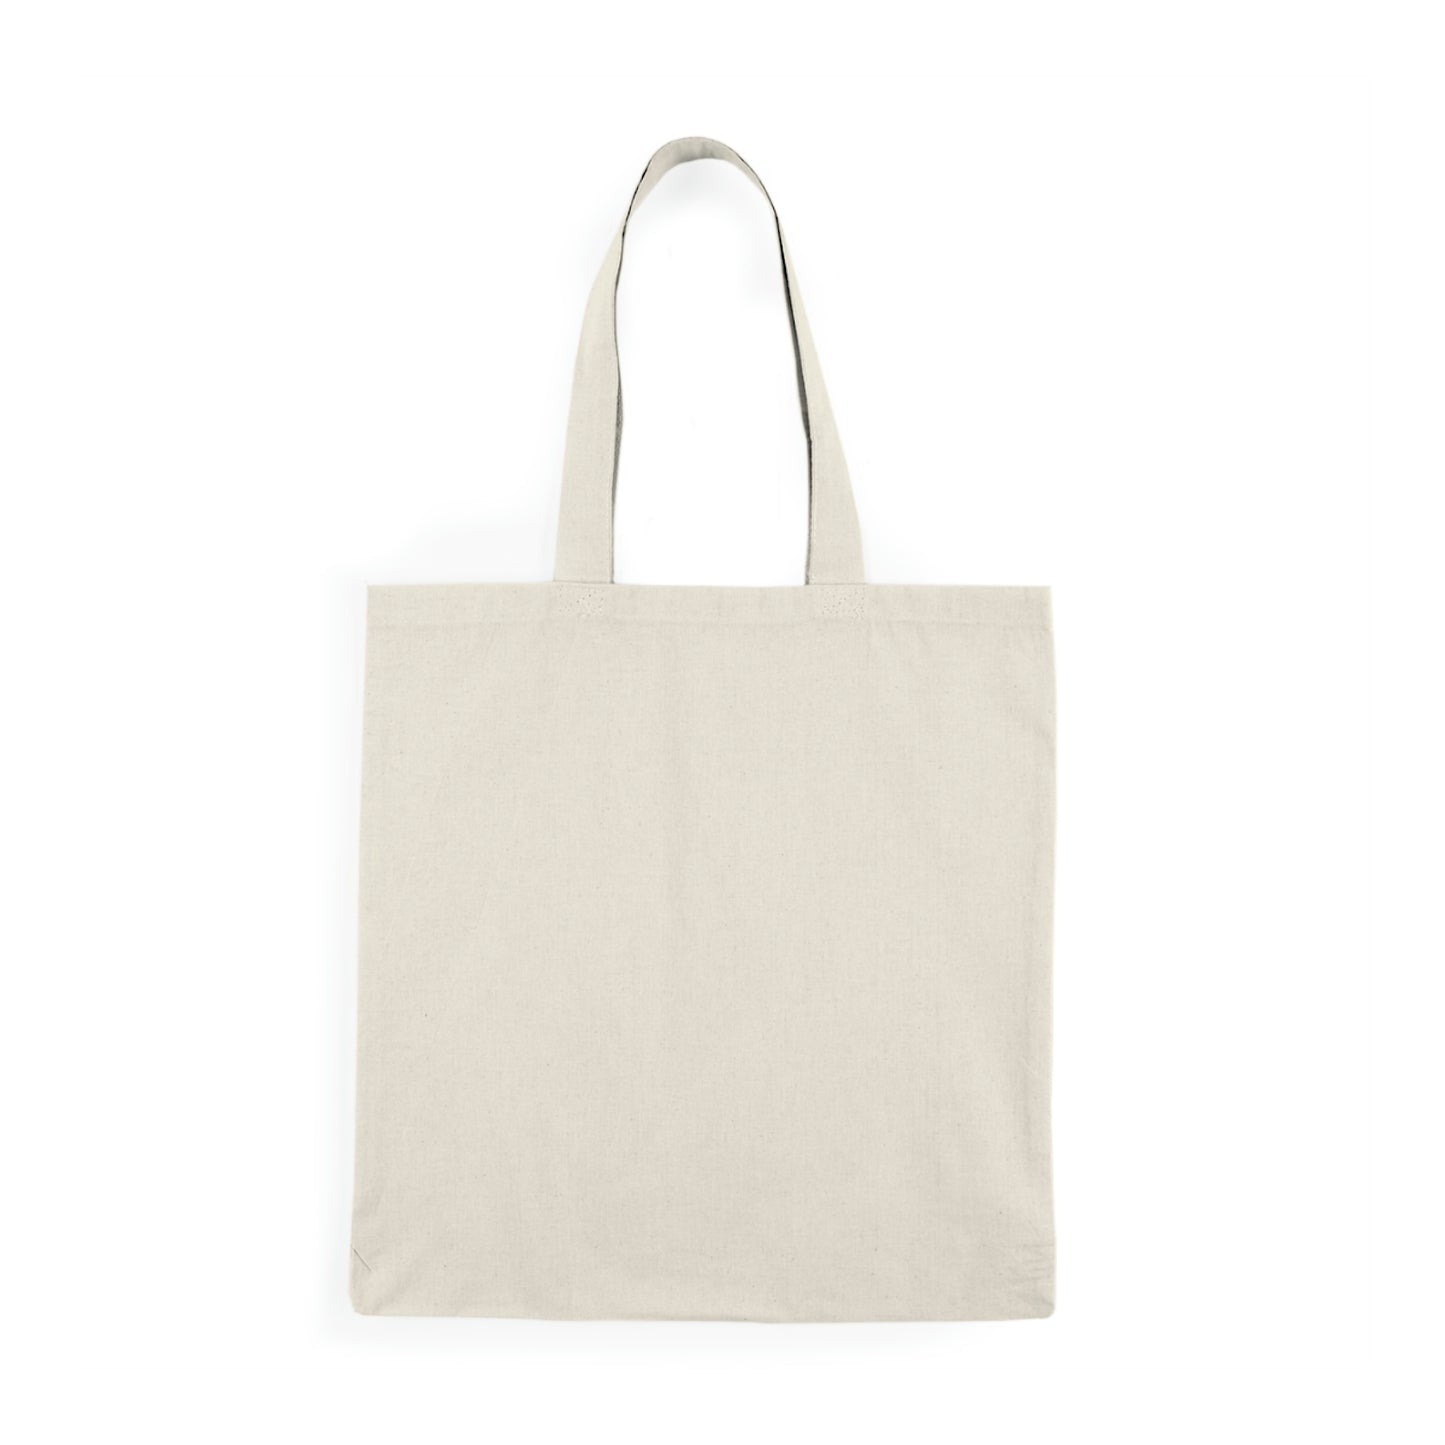 Catch A Raven - Natural Tote Bag